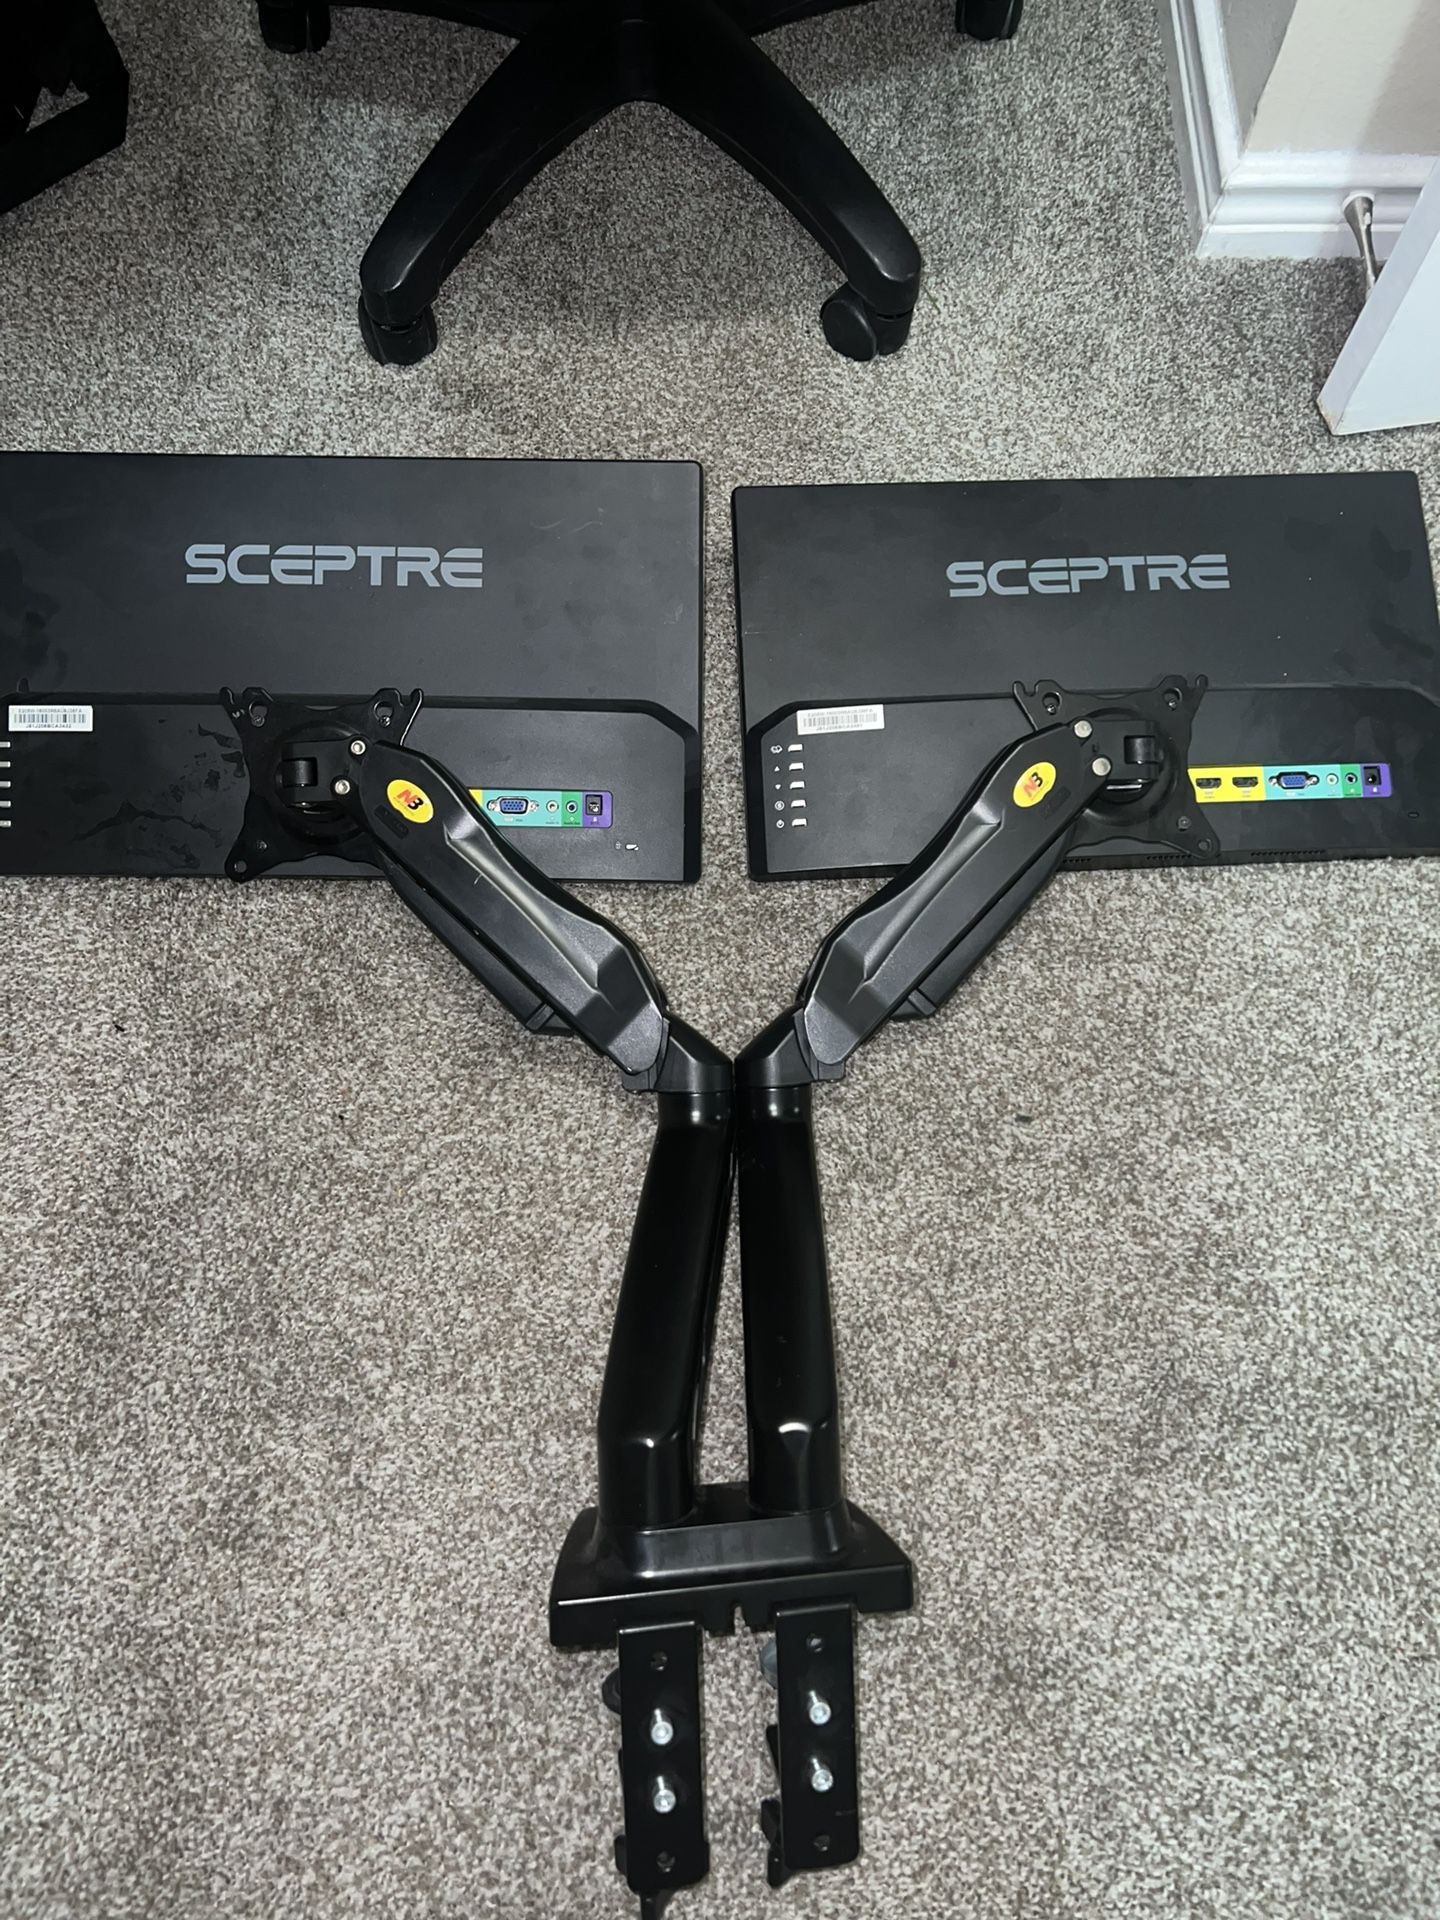 Sceptre 20” LED Monitors With Adjustable NB Dual Monitor Mount